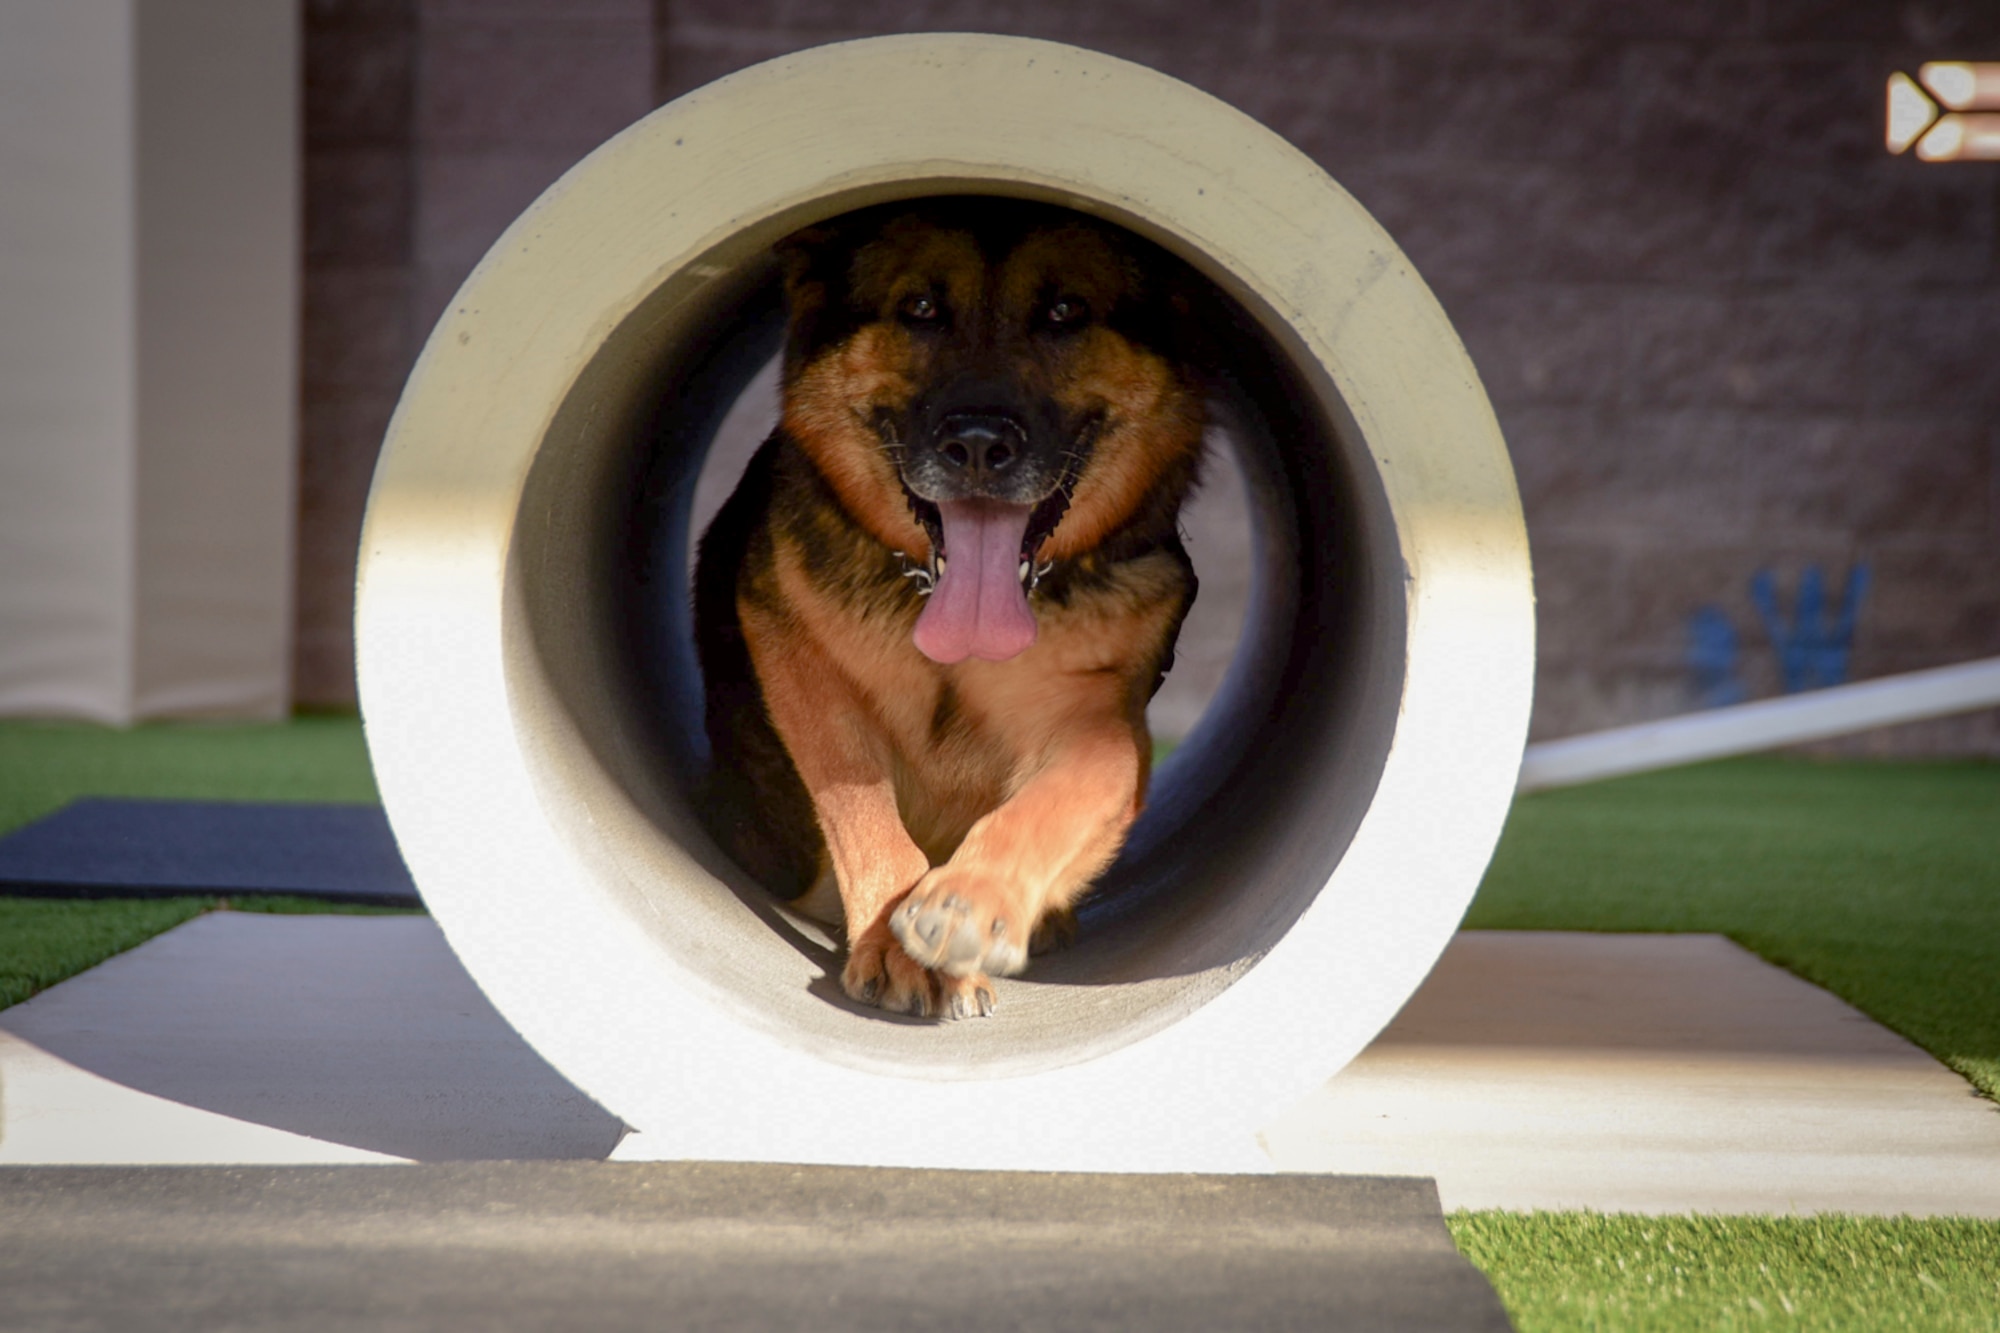 Habo, 99th Security Forces Squadron military working dog, crawls through a tube at Nellis Air Force Base, Nevada, August 7, 2017. Habo is primarily trained to detect narcotics. (U.S. Air Force photo by Airman 1st Class Andrew D. Sarver/Released)